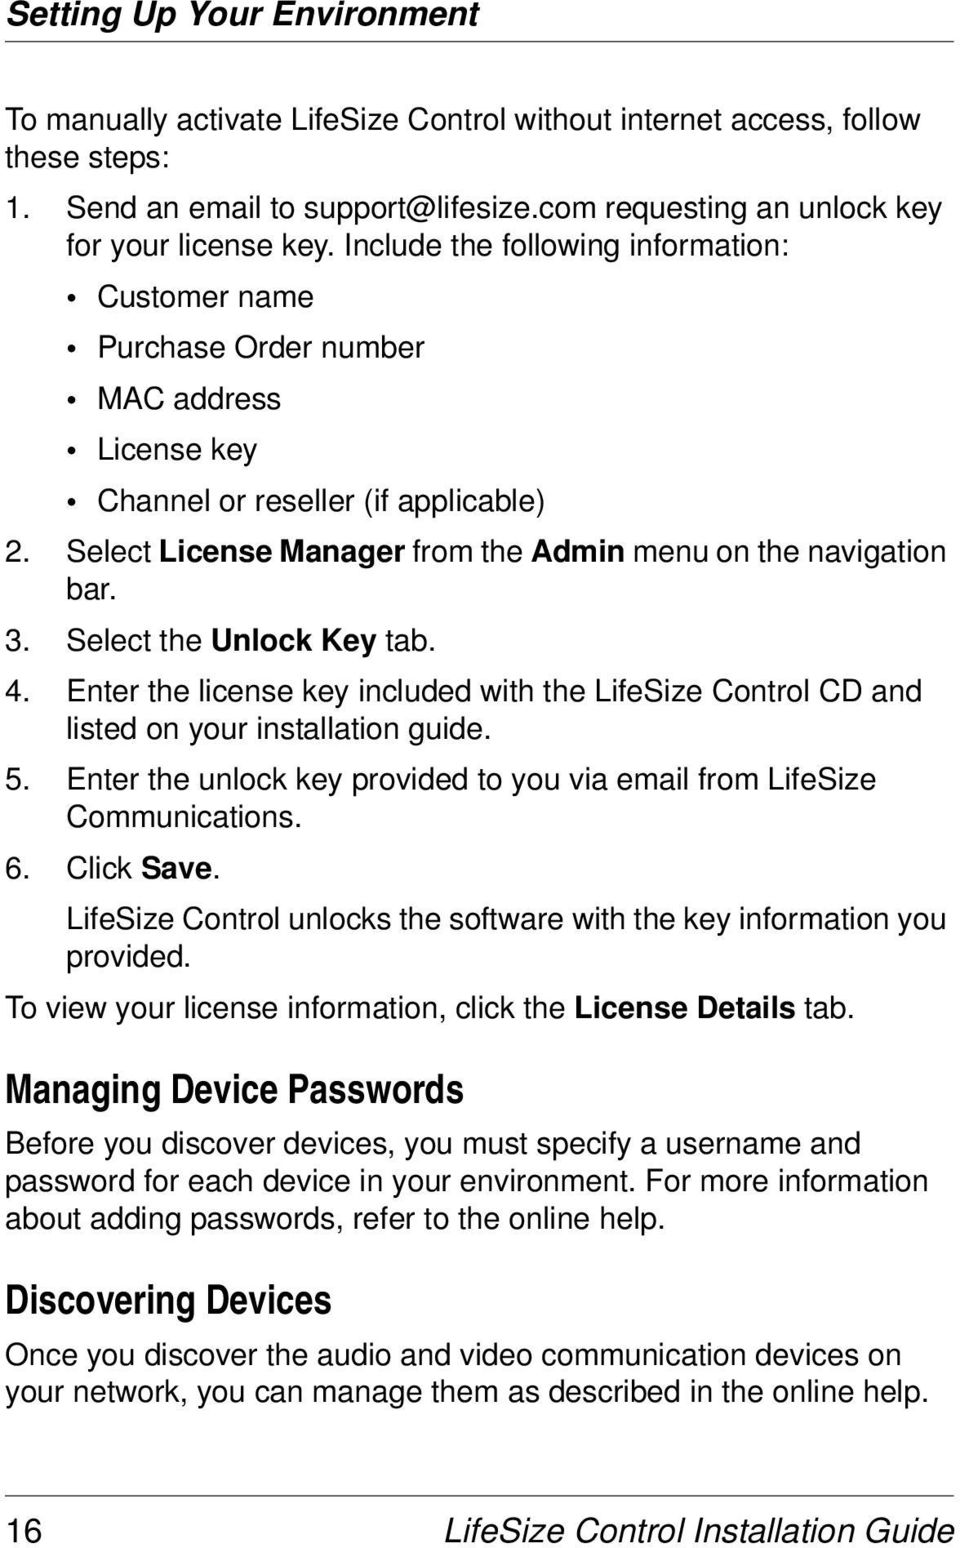 3. Select the Unlock Key tab. 4. Enter the license key included with the LifeSize Control CD and listed on your installation guide. 5.